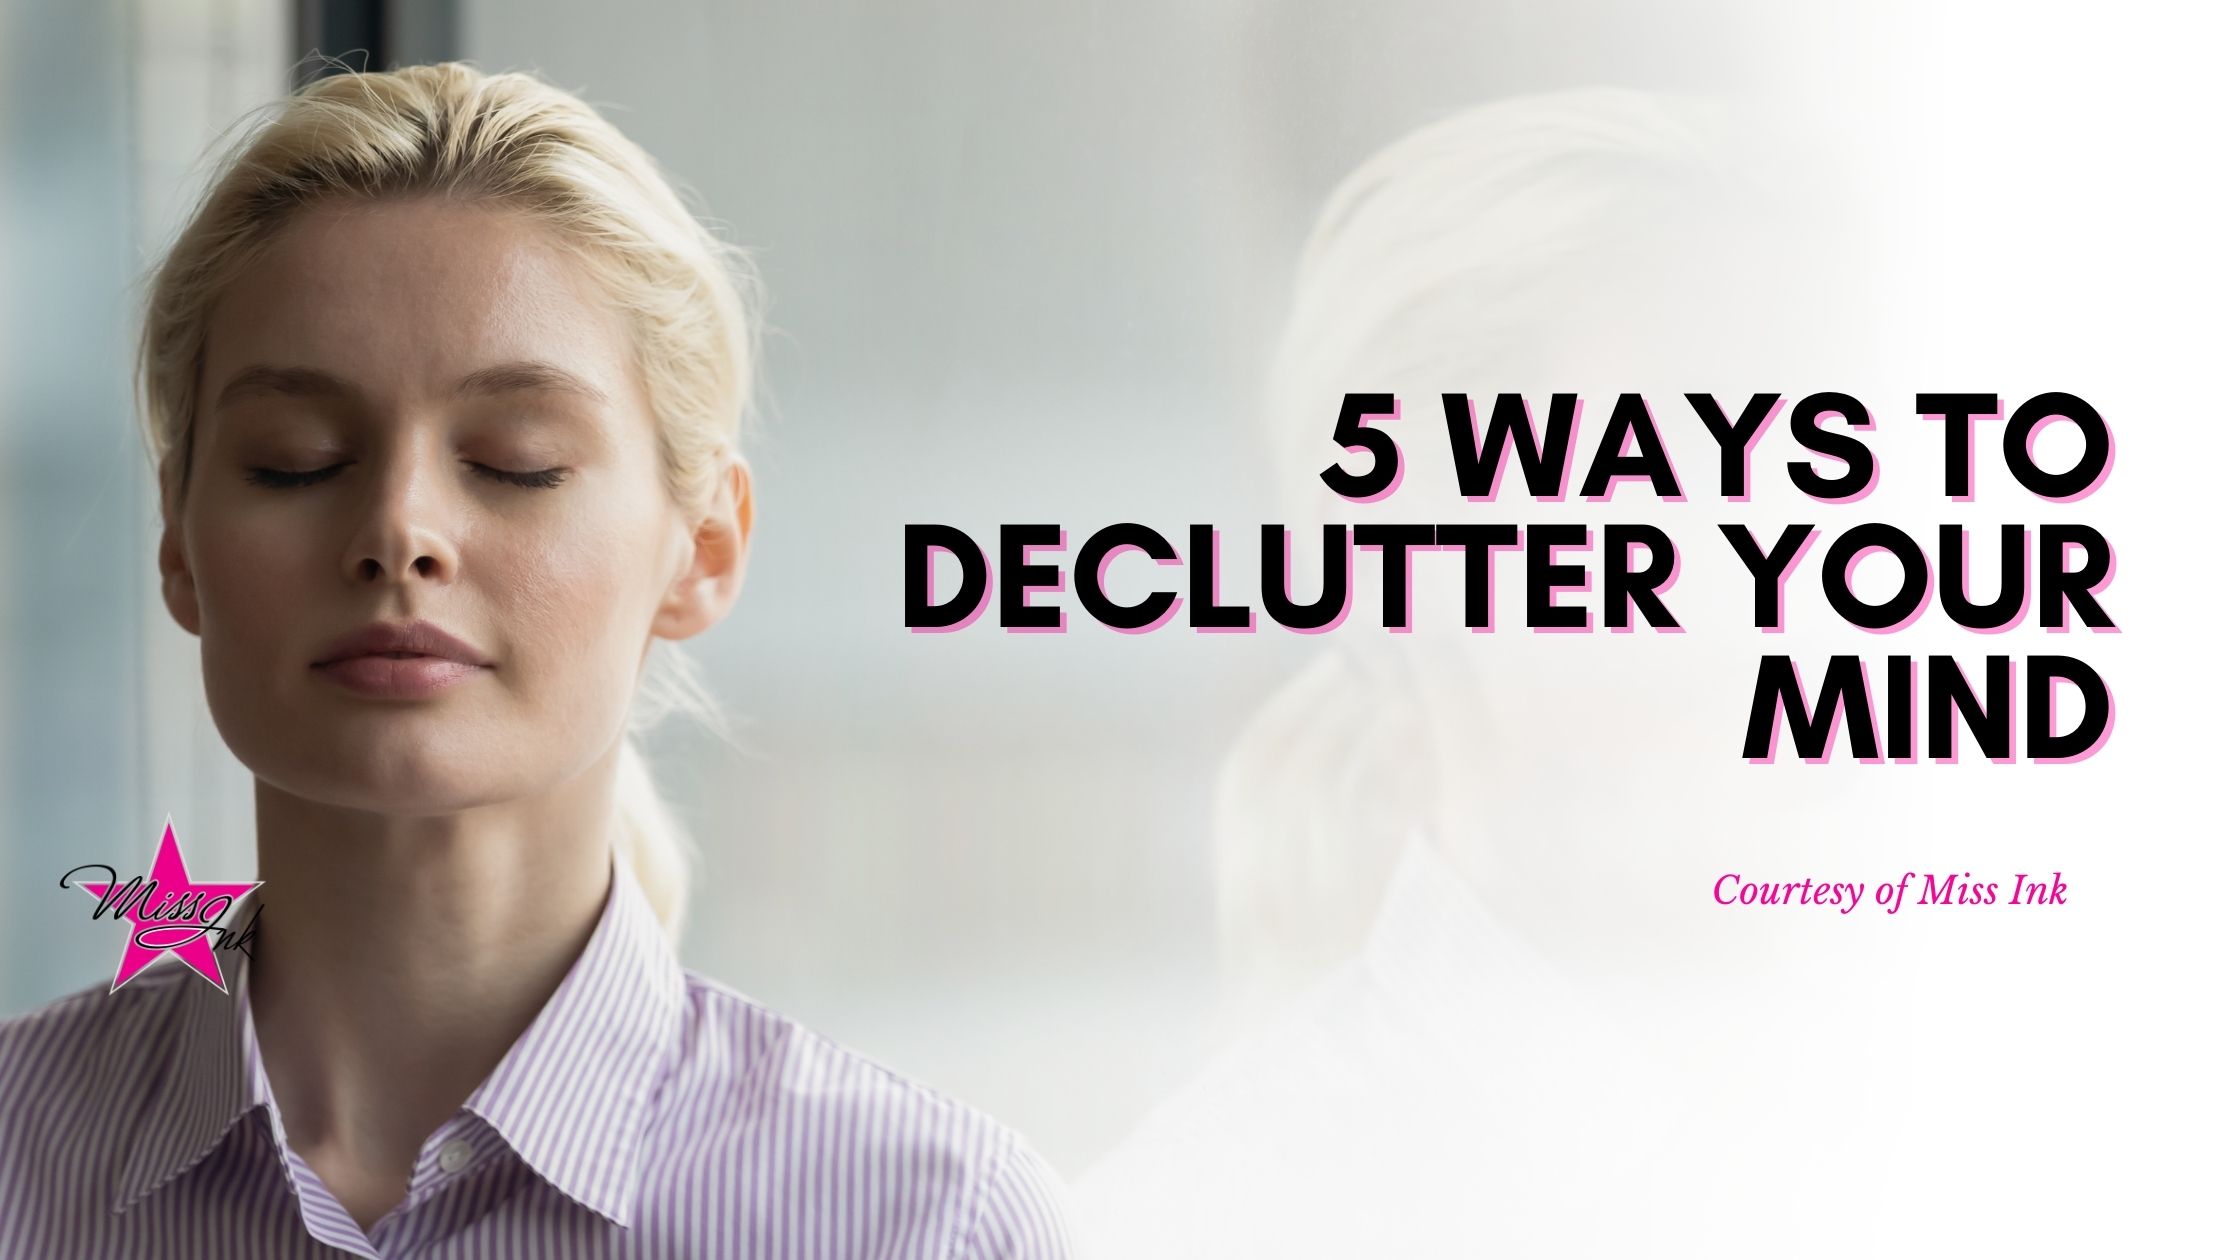 5 Ways To Declutter Your Mind